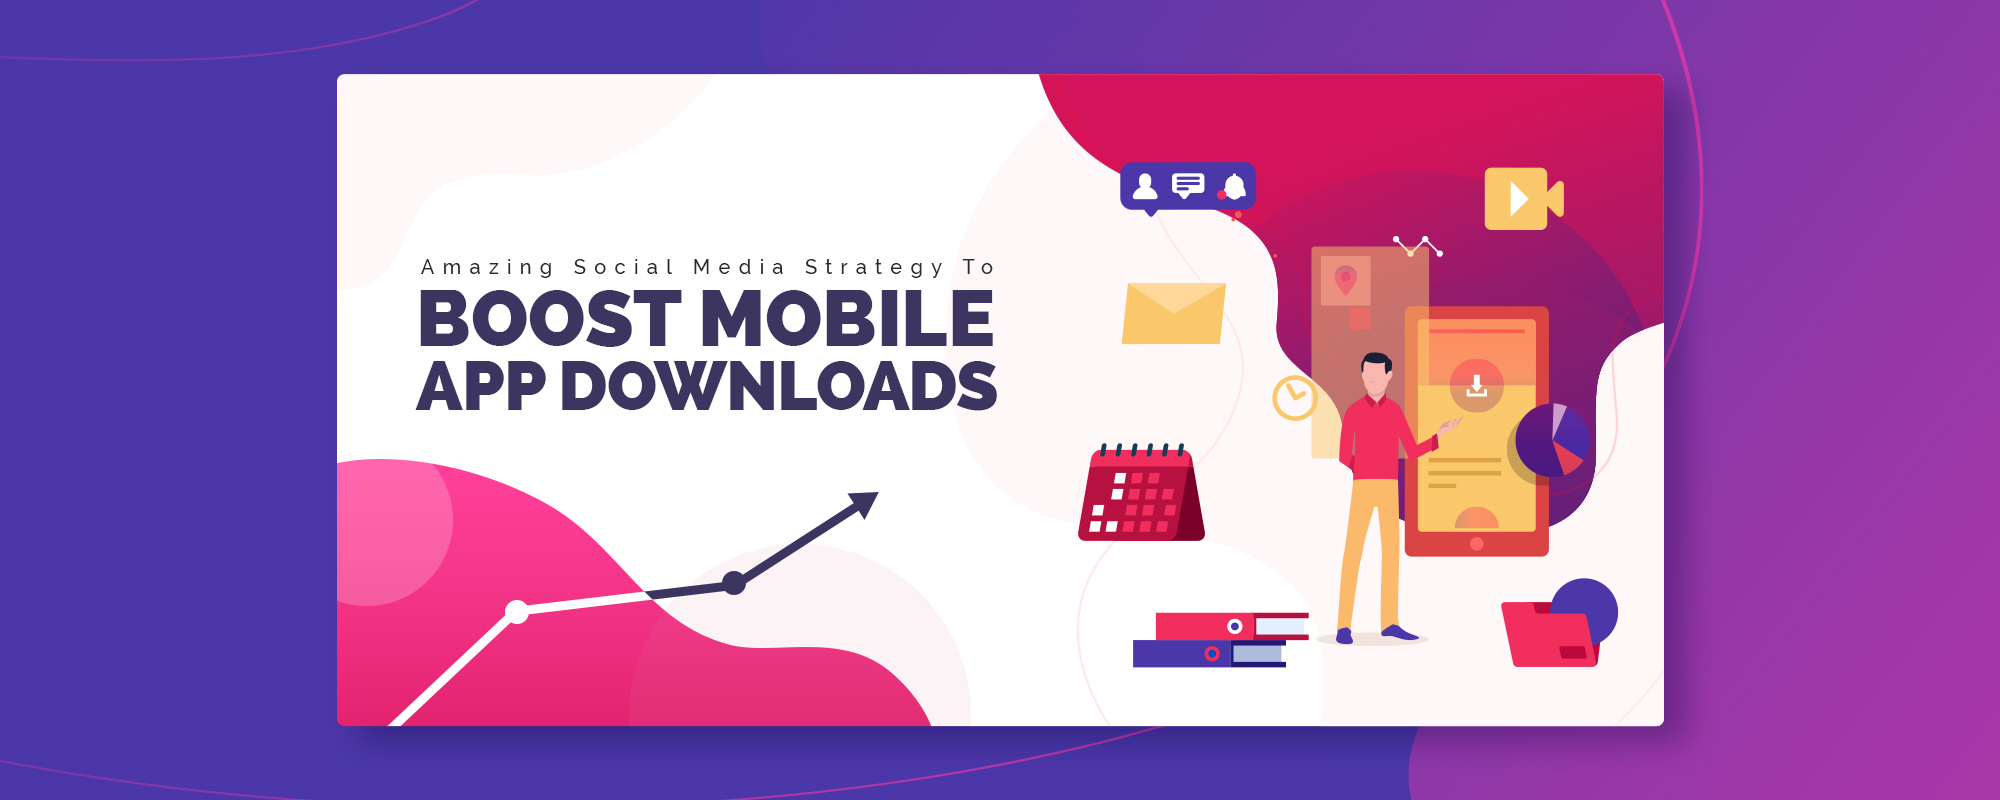 7 Tips to Increase Mobile App Downloads From Your Facebook & Instagram Ads